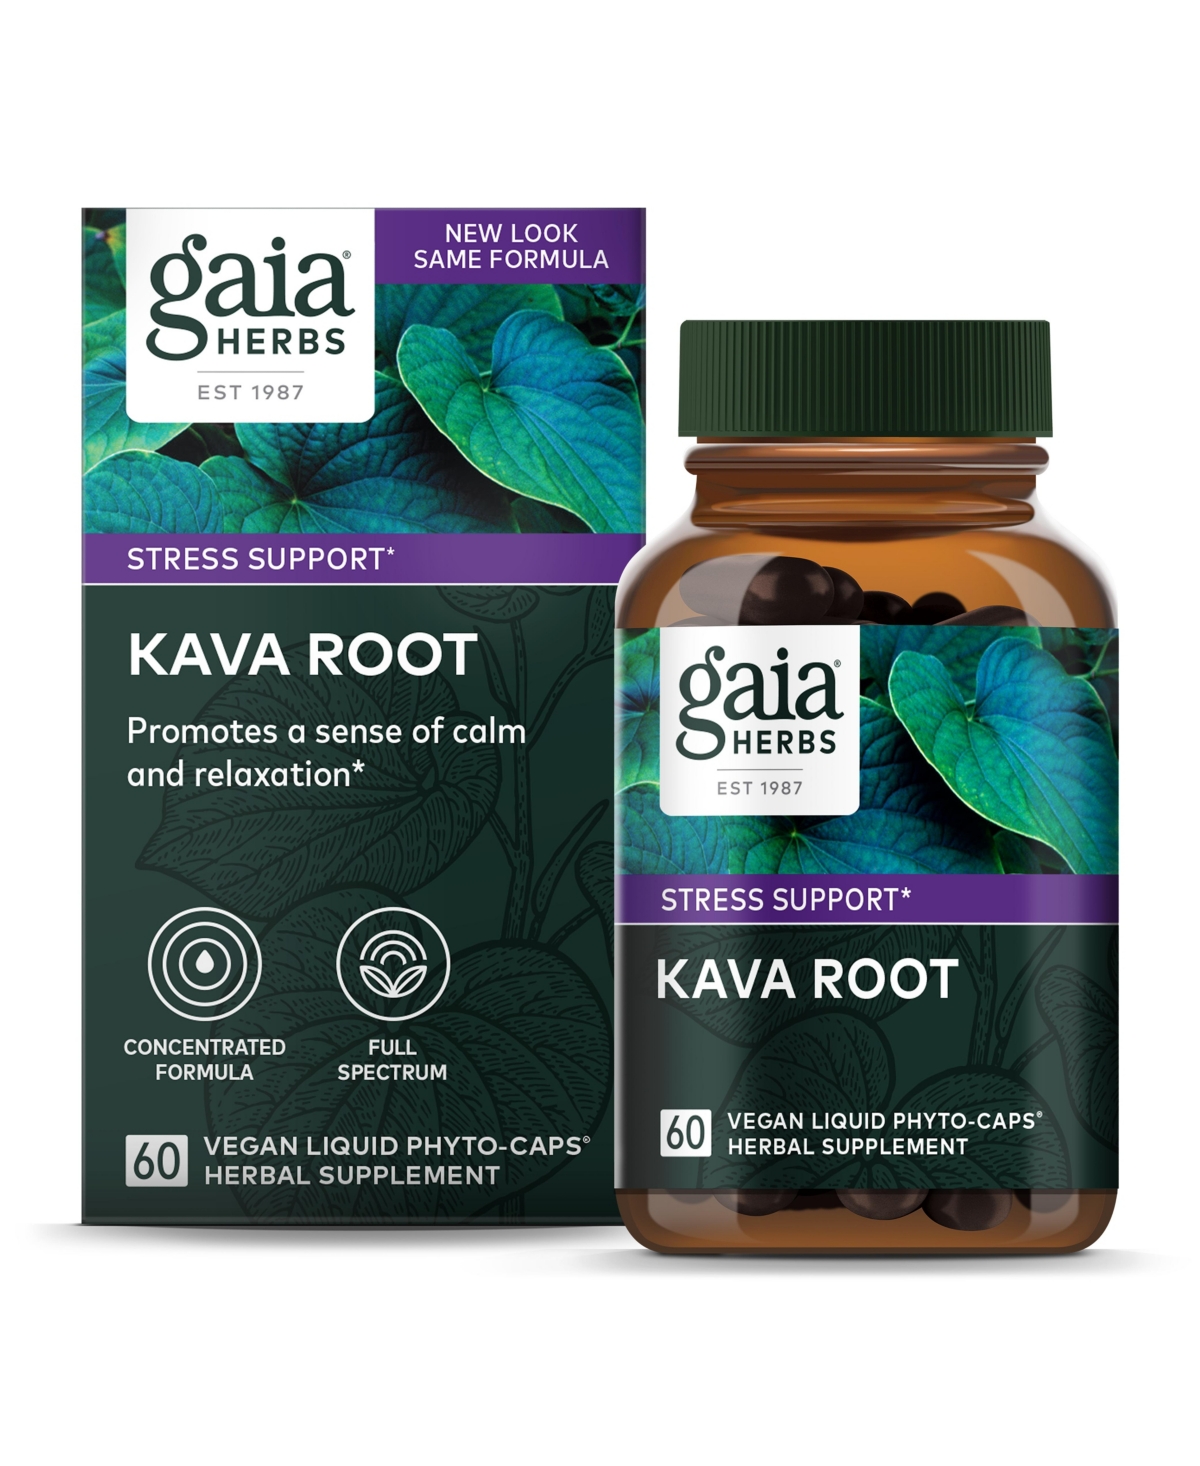 Kava Root - Helps Sustain a Sense of Natural Calm and Relaxation During Times of Stress - Made With Noble Kava Cultivars - 60 Liquid Phyto-